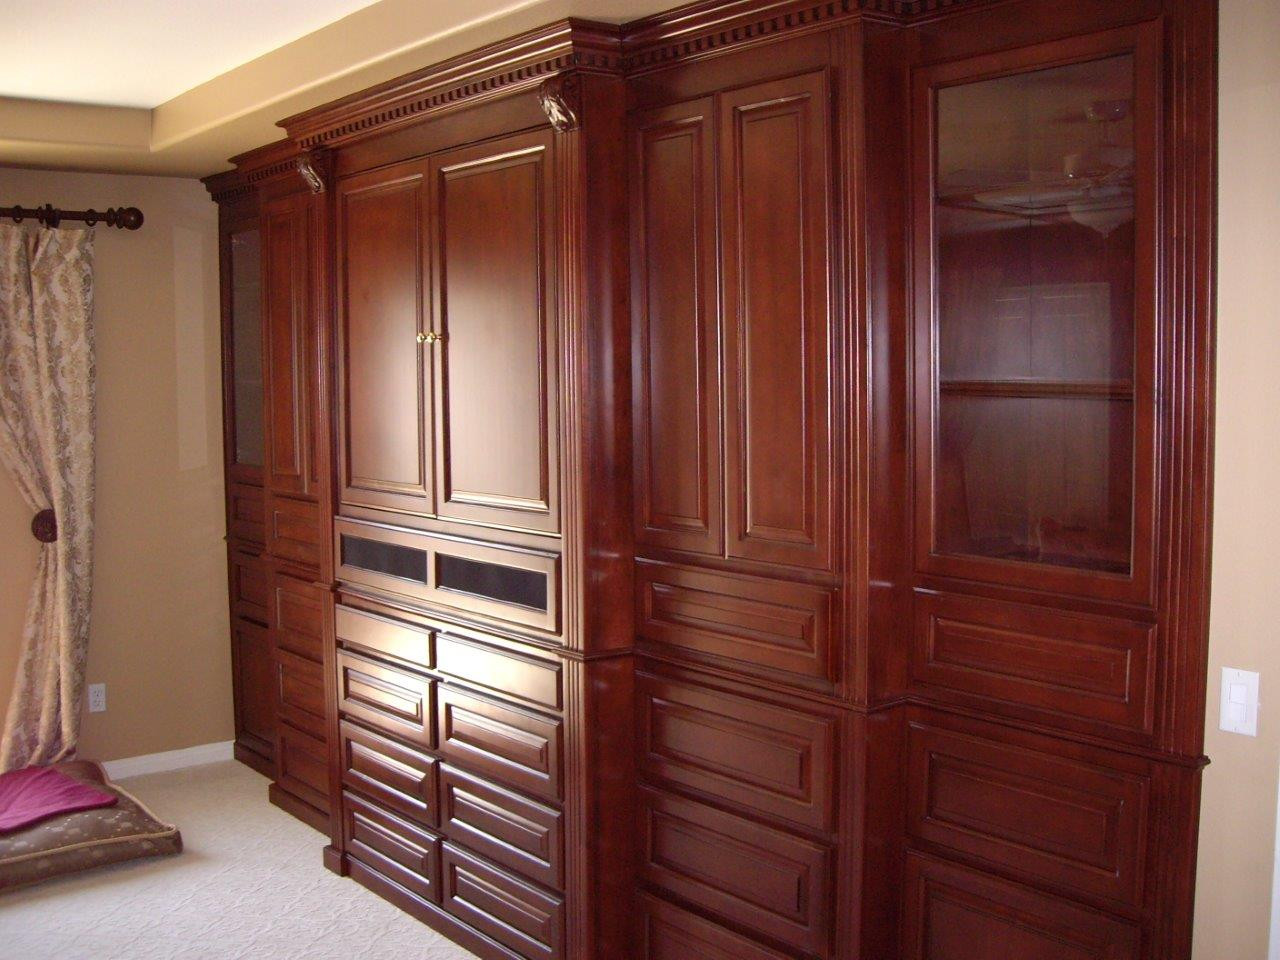 Cabinet For Bedroom
 Murphy Beds and Bedroom Cabinets Woodwork Creations